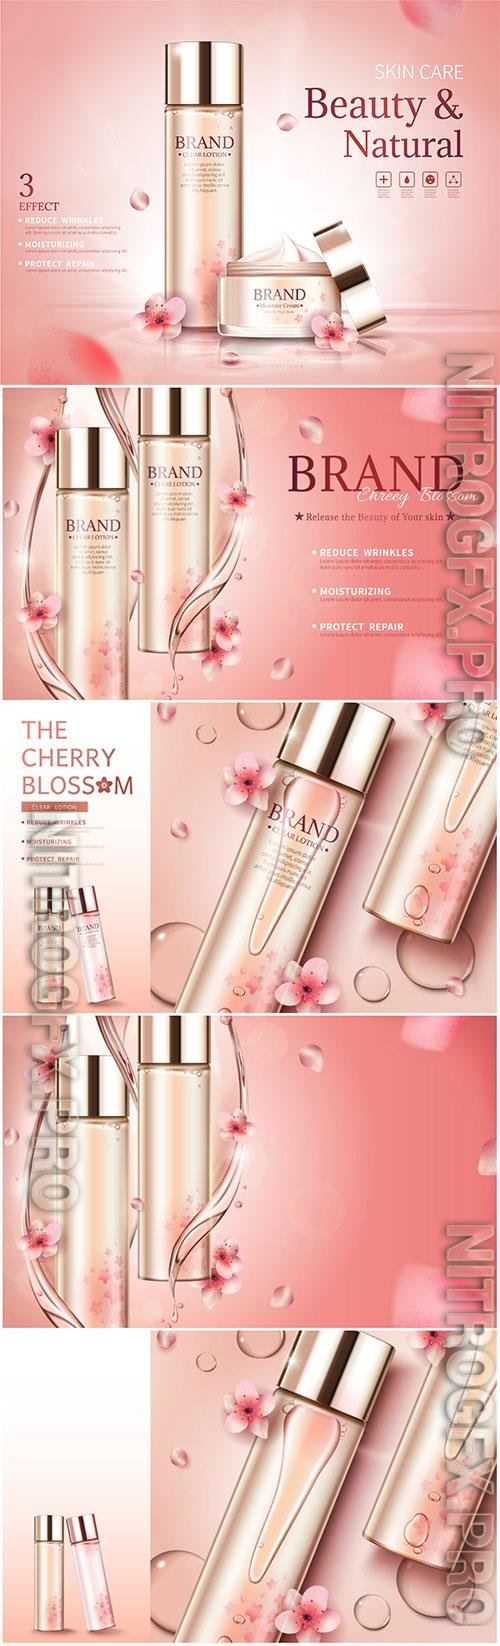 Brand perfumes and cream for women in vector